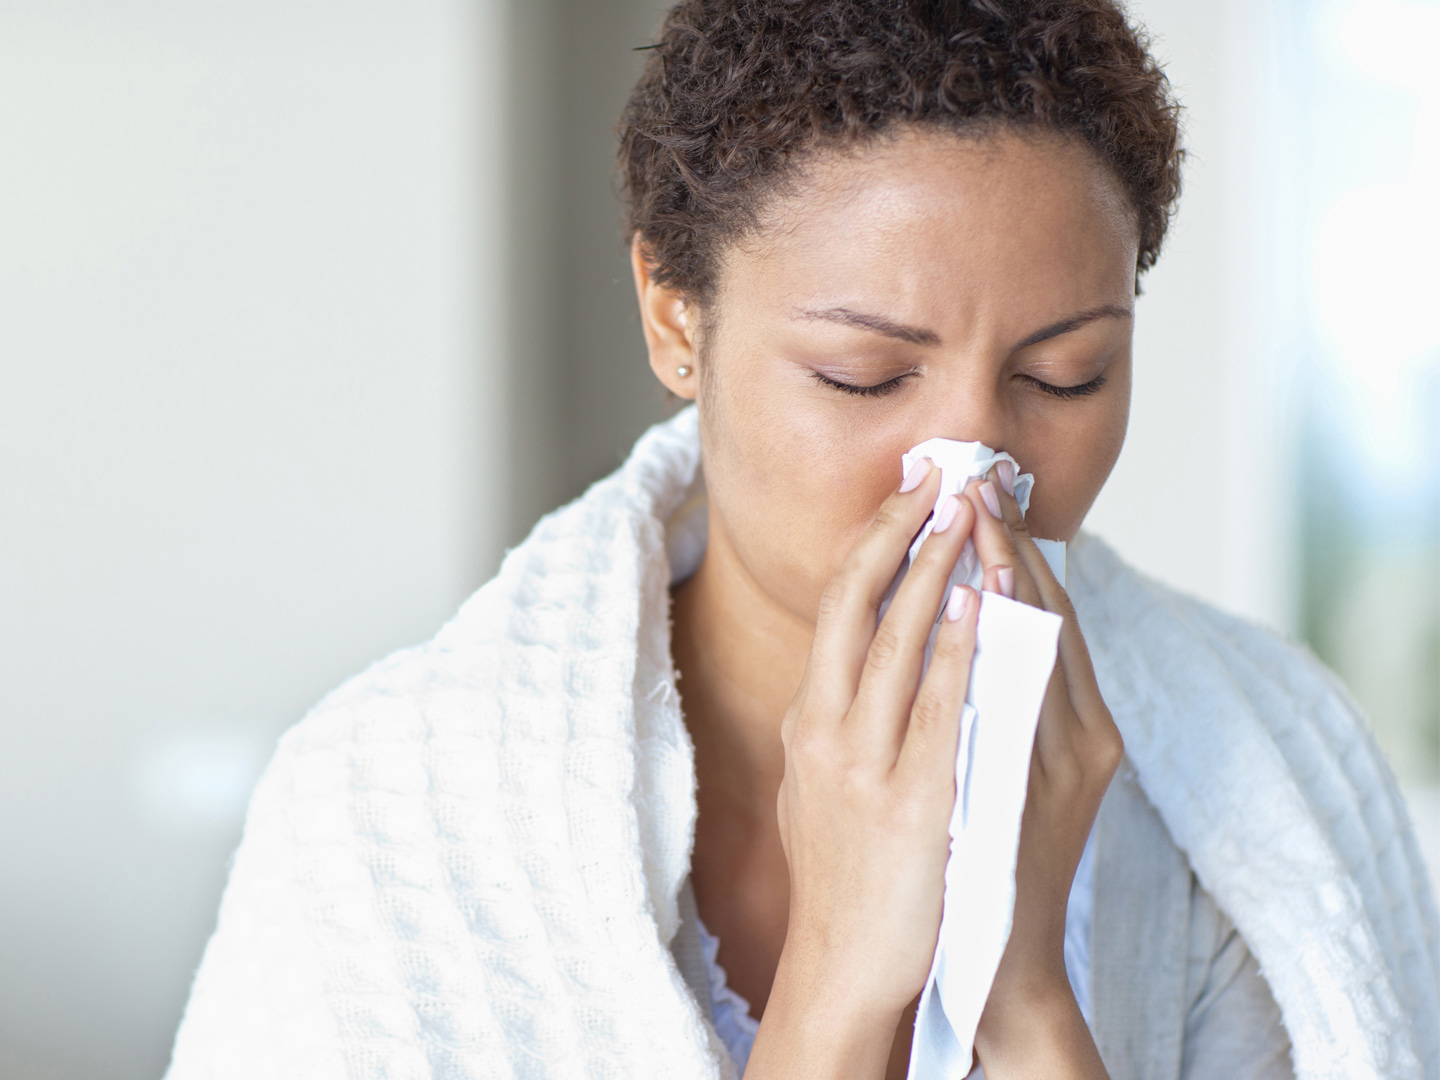 CAN LOSS OF SMELL BE A SIGN OF FLU OR IS IT ALWAYS A SIGN OF COVID